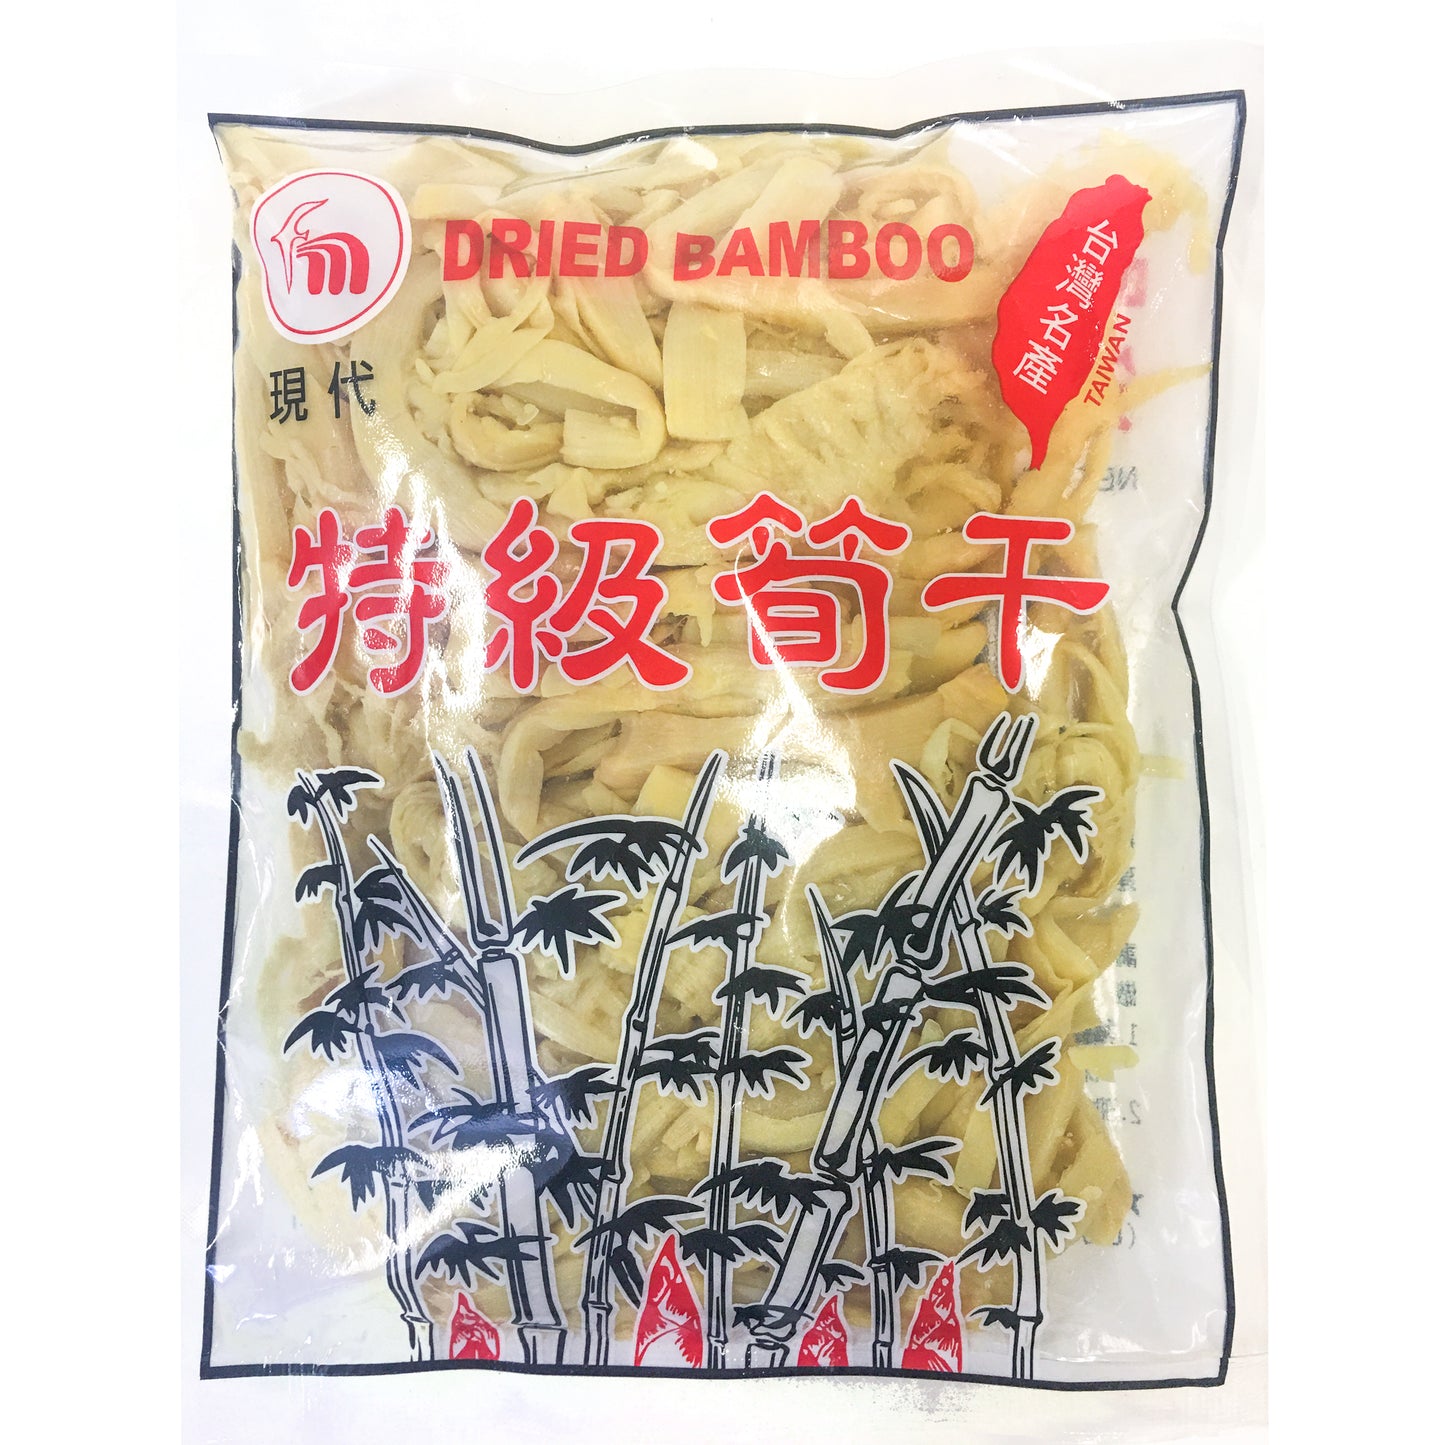 Dried Bamboo Strips (S)小包干笋条